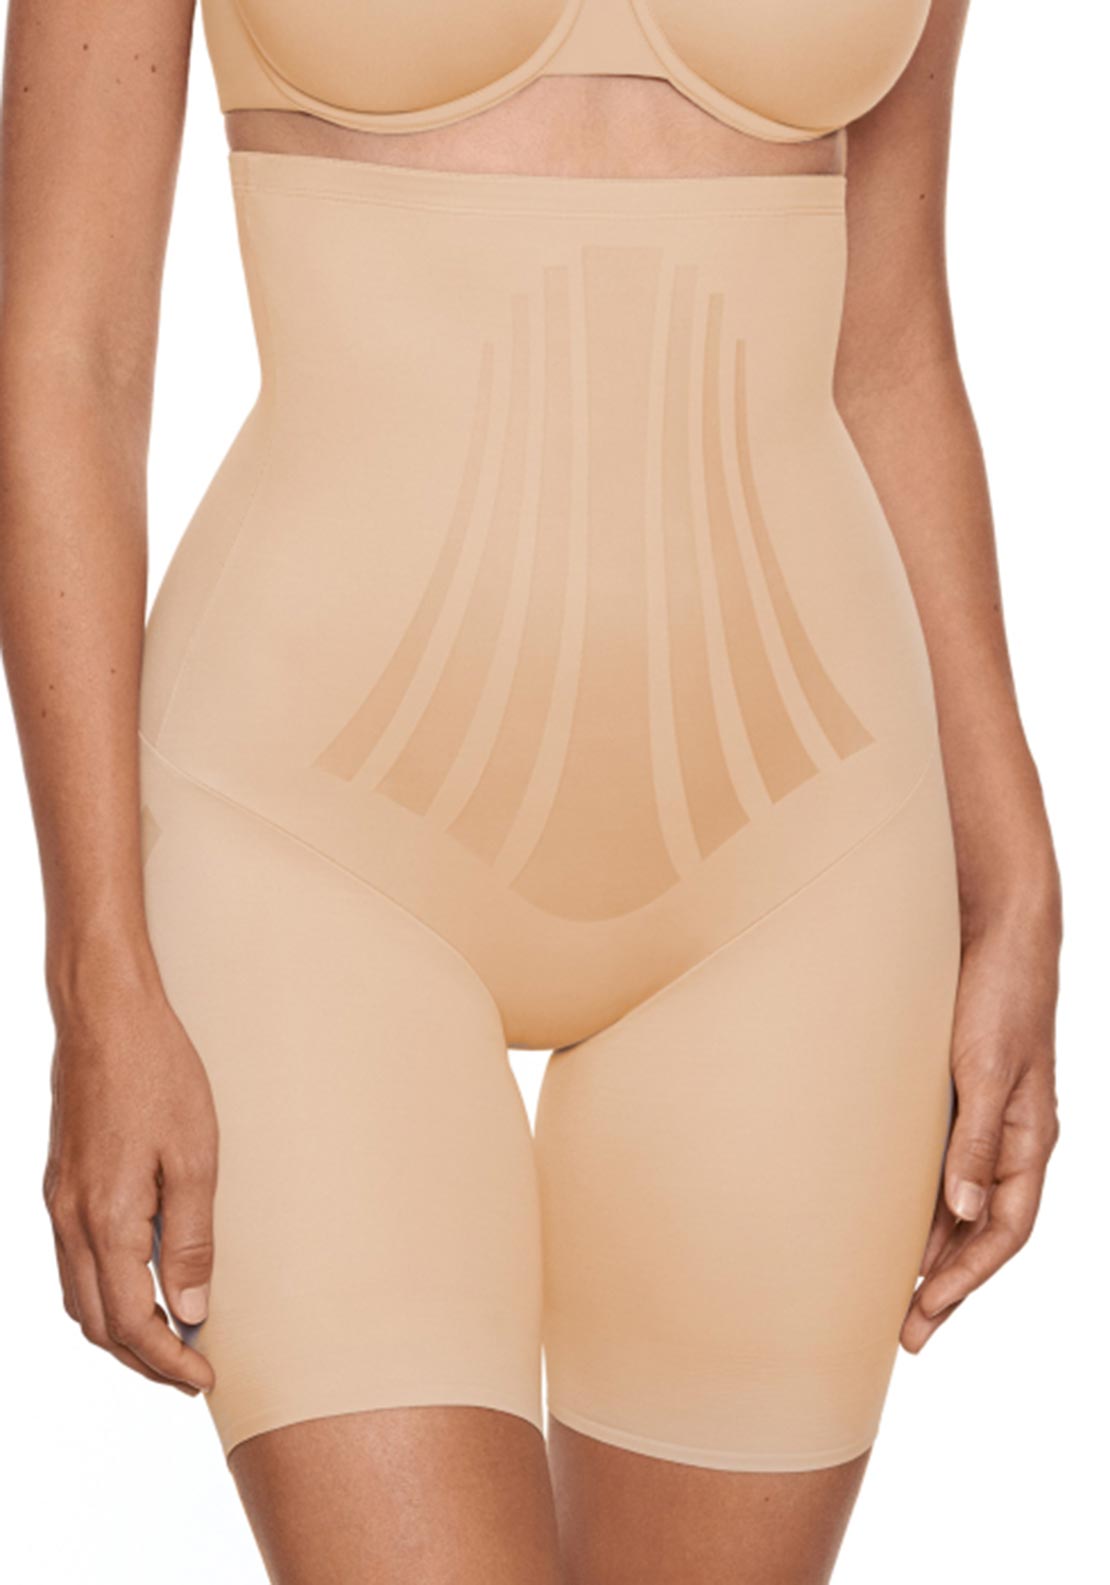 Miraclesuit Women's Comfy Curves Hi-Waist Thigh Slimmer Shapewear